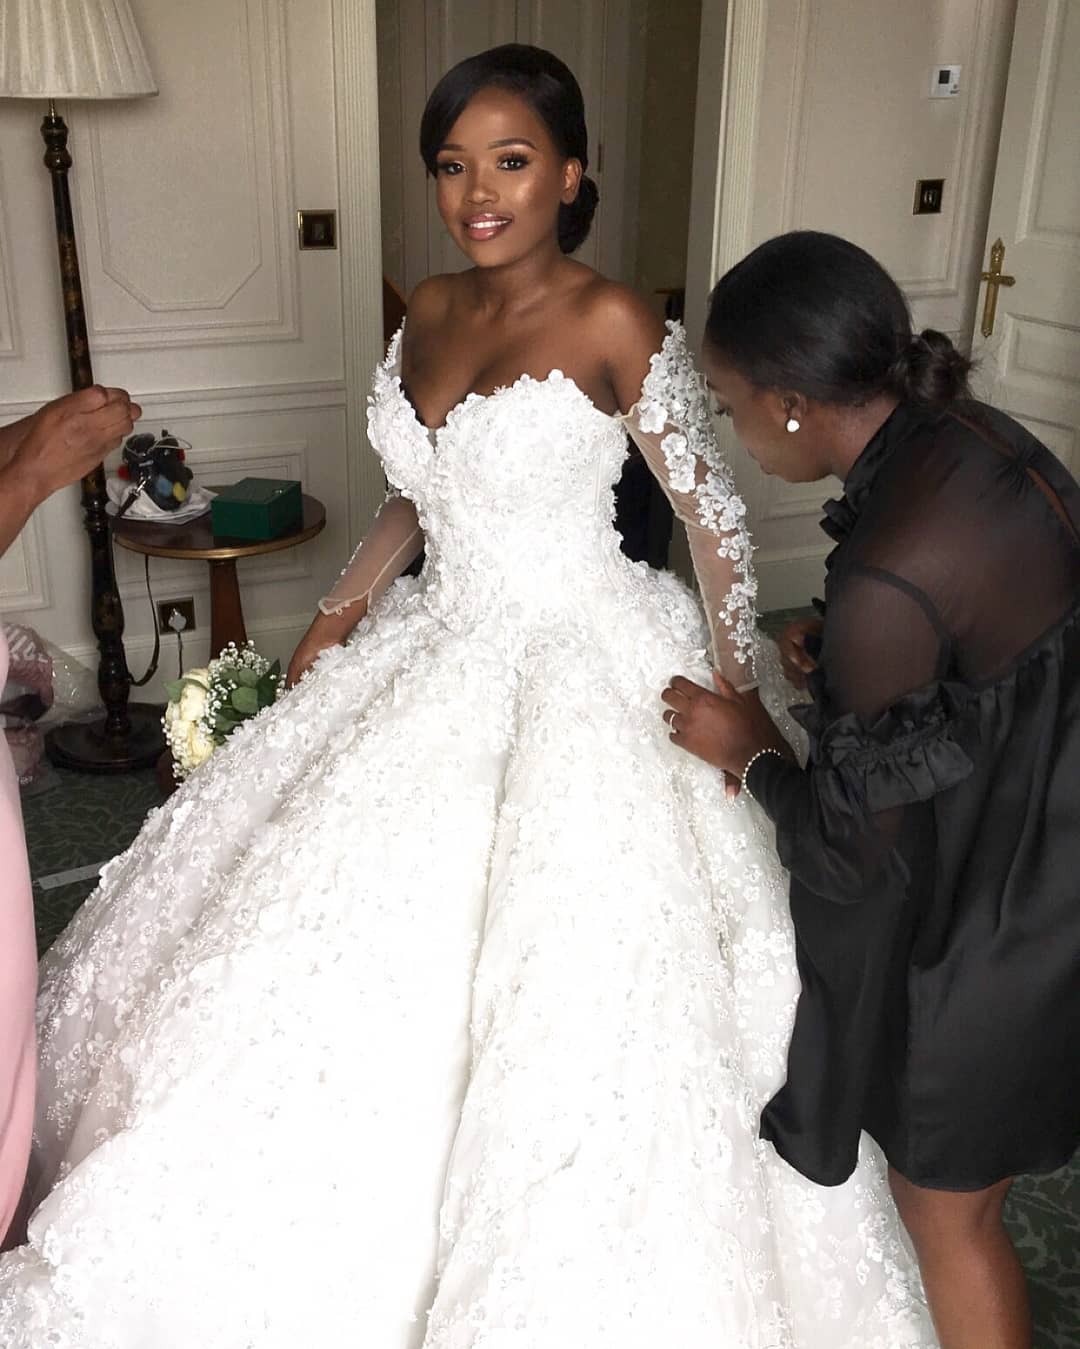 Perfect 2018 Wedding Gowns That Beat All Others!